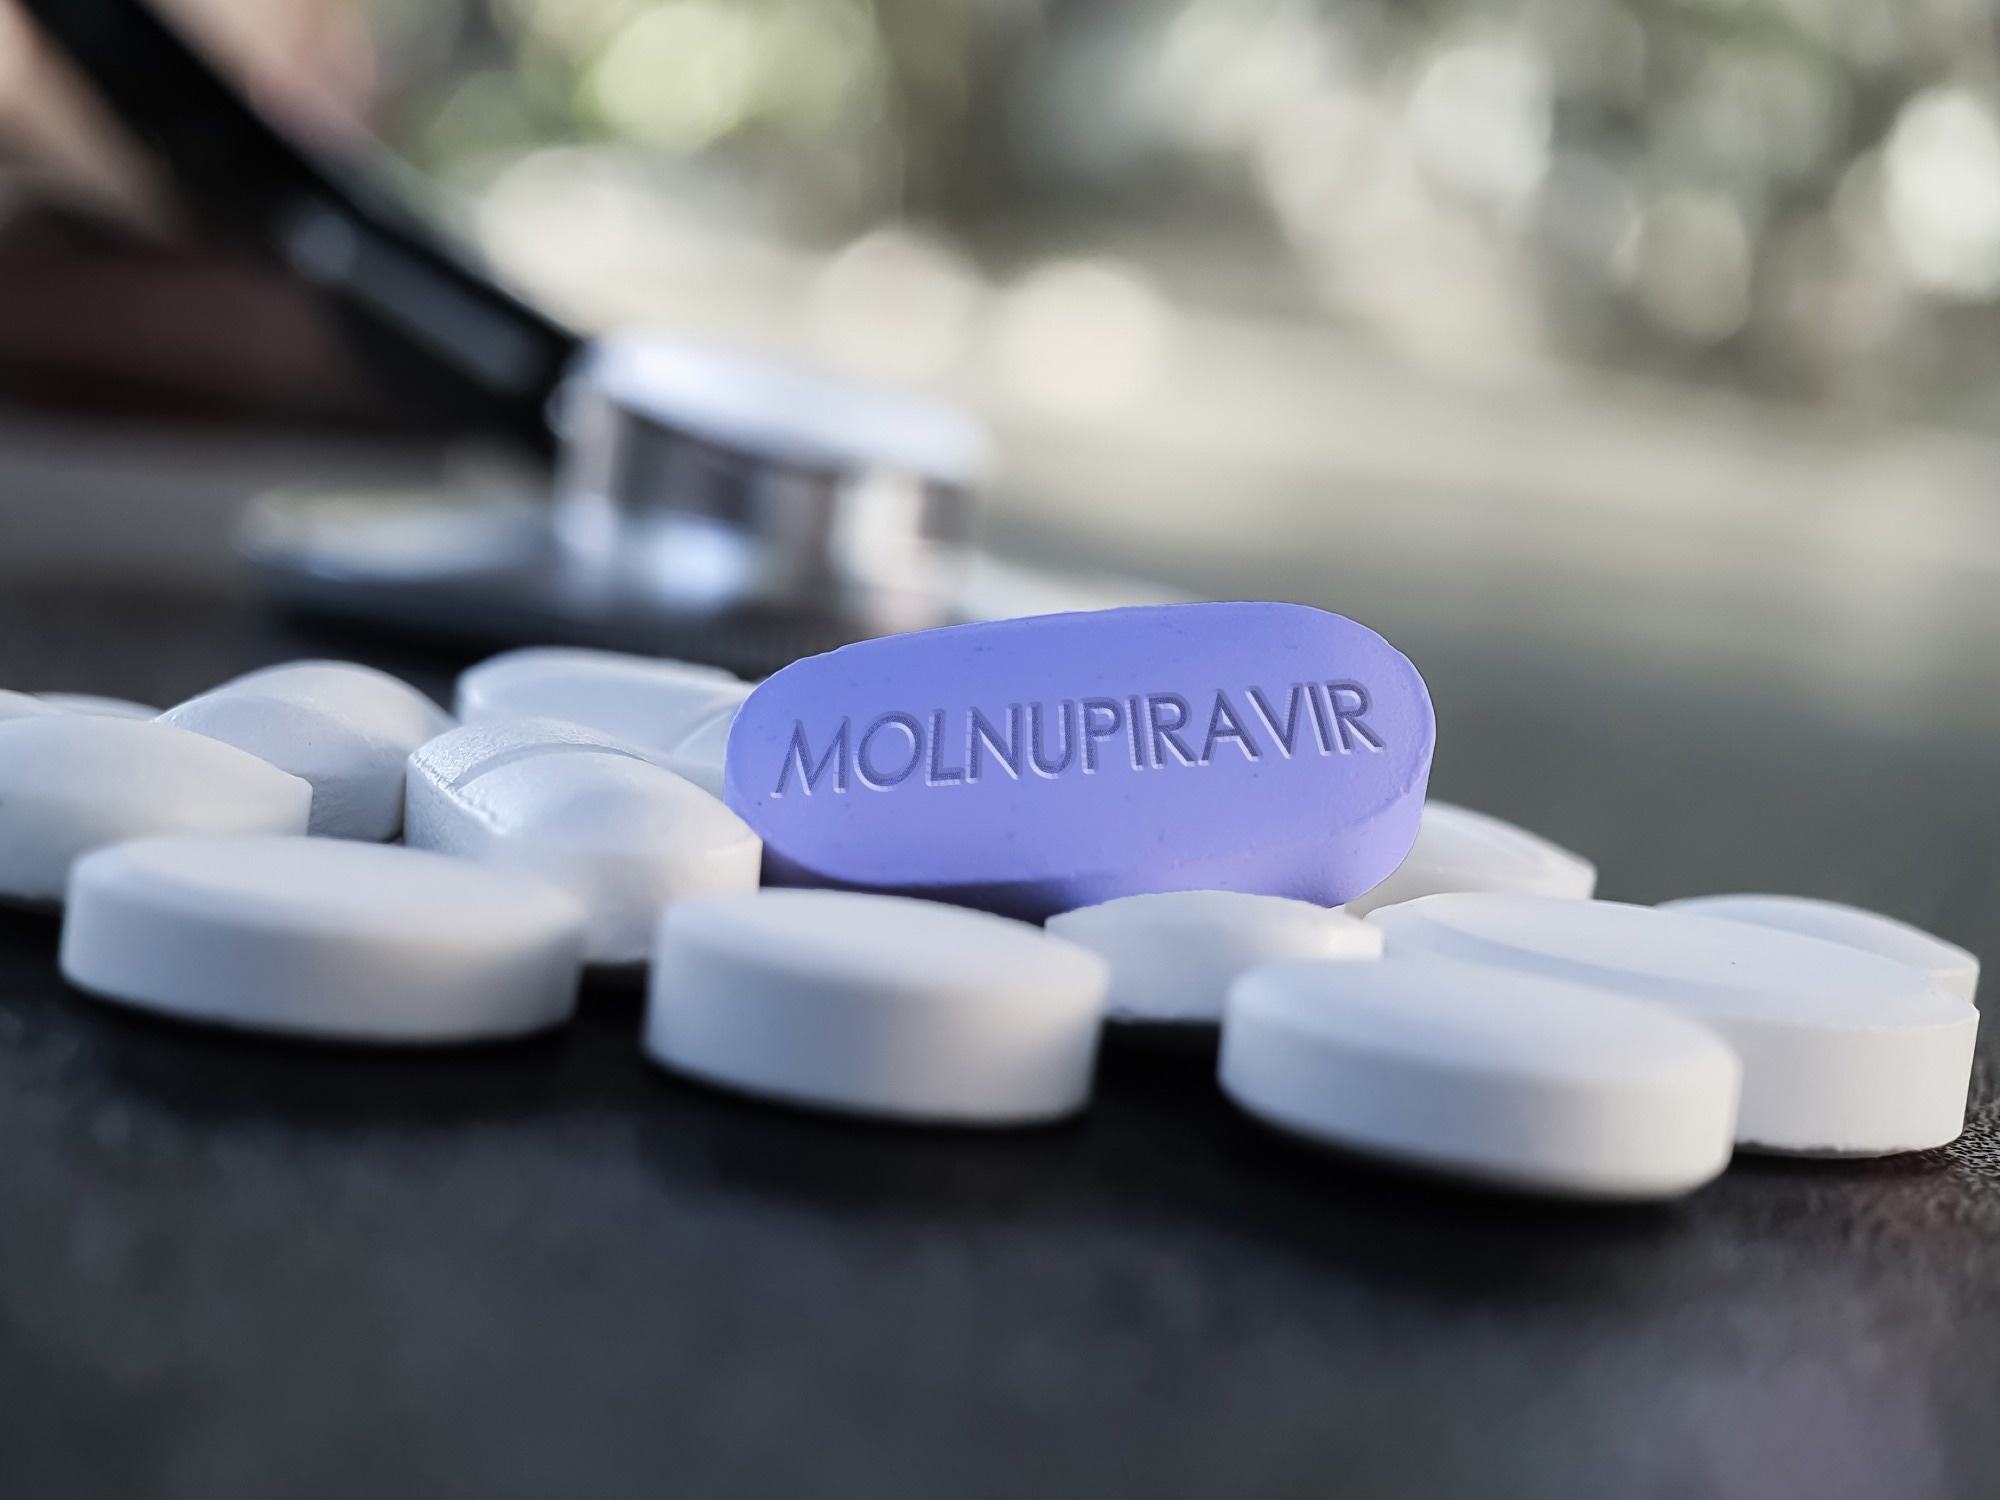 Study: Molnupiravir and risk of post-acute sequelae of COVID-19: cohort study. Image Credit: Sonis Photography / Shutterstock.com